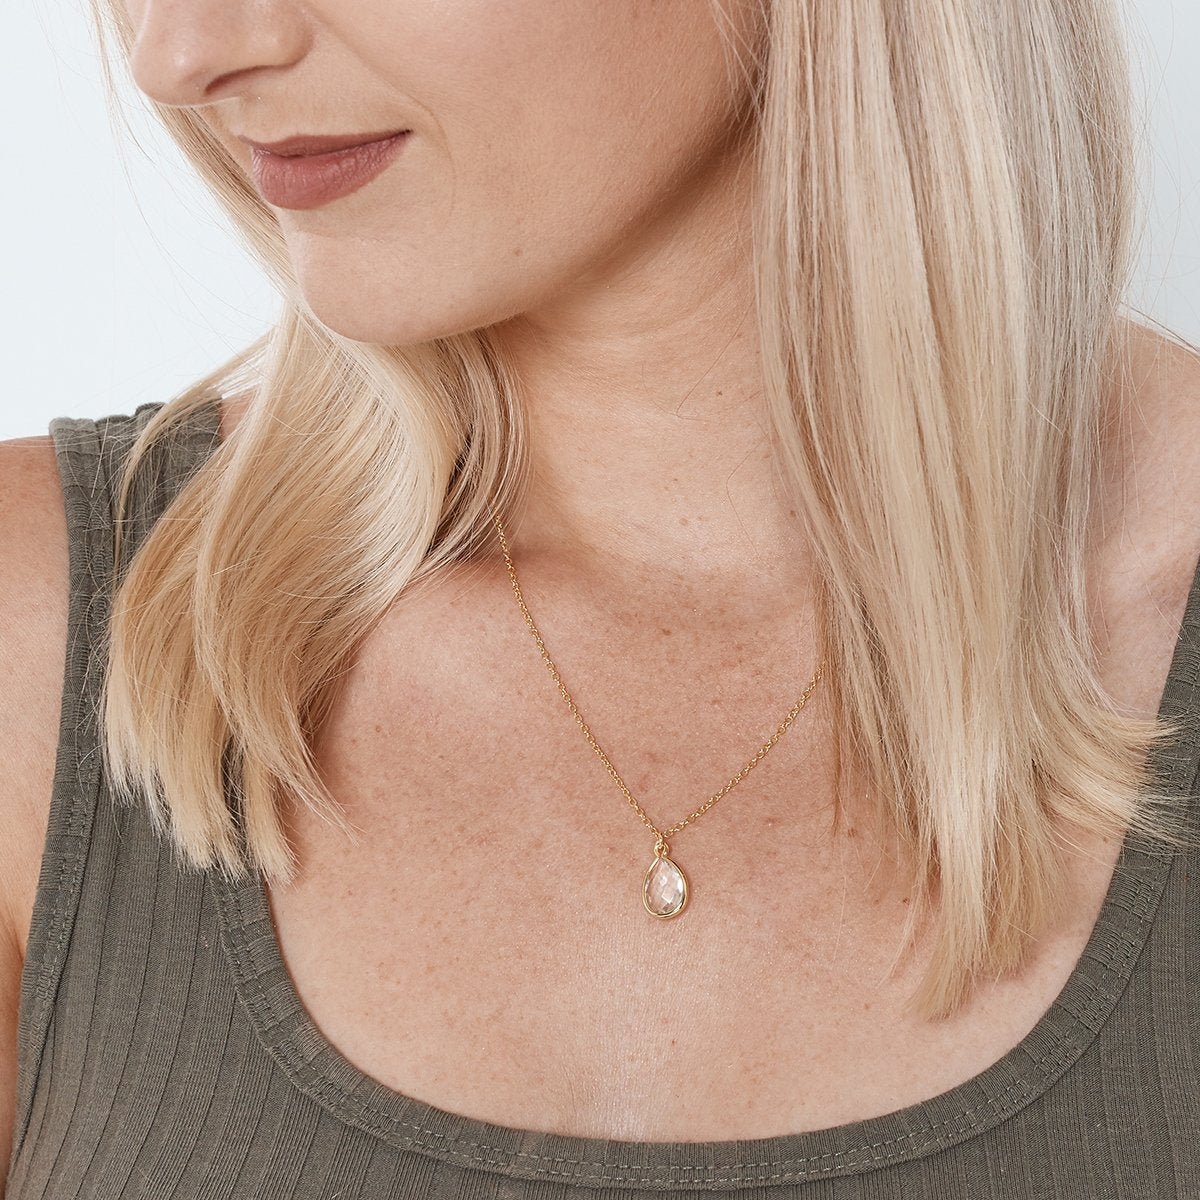 Mother Daughter Necklace Gold Filled – The Dainty Doe